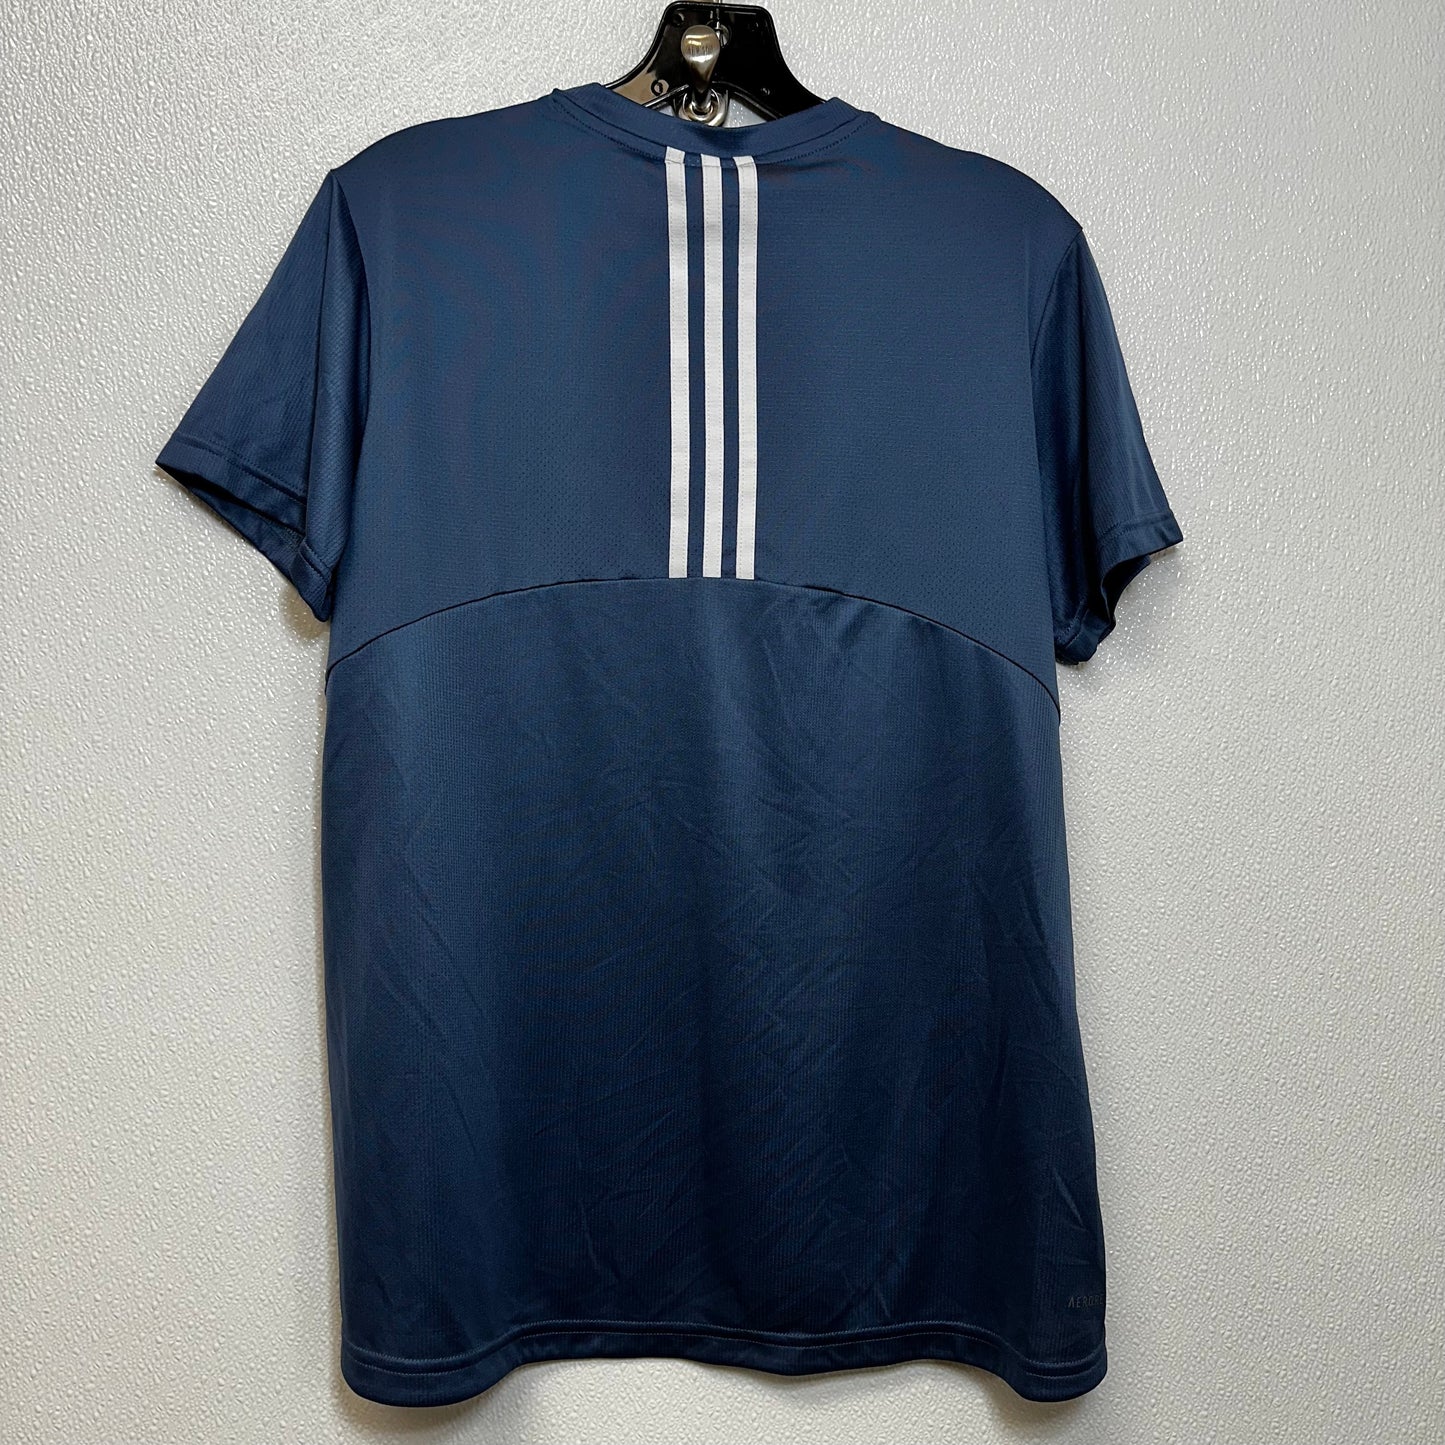 Blue Athletic Top Short Sleeve Adidas, Size L